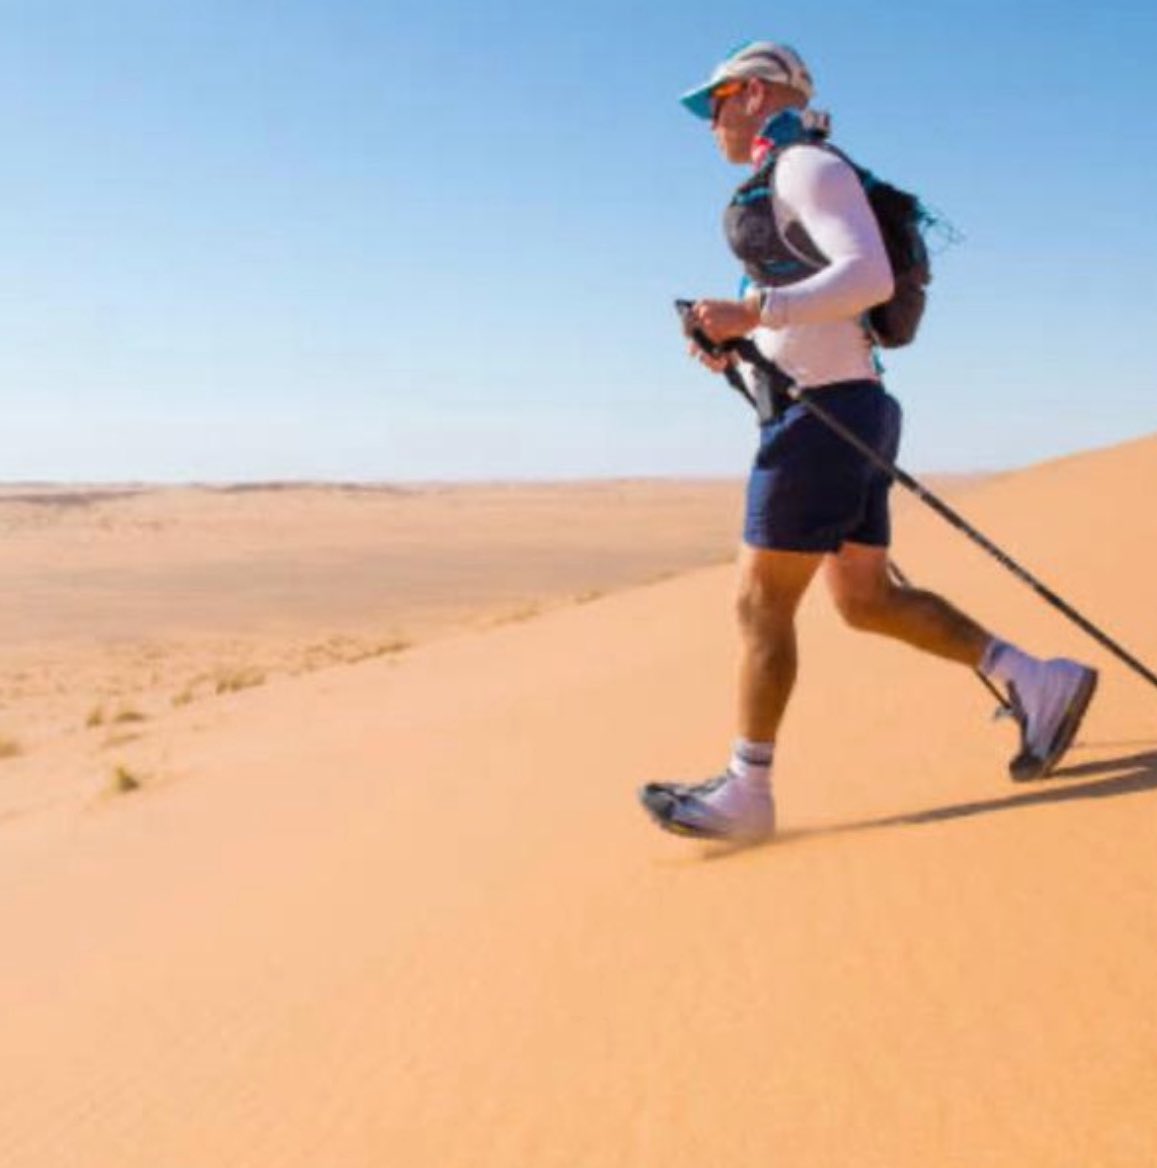 Wishing the best of luck to @RobbieRinder as he runs the toughest race on Earth, the Marathon des Sables. It’s 250km over six days in the Sahara and he'll be joining them to raise money for the Army Benevolent Fund. You can find out more and donate here: justgiving.com/campaign/rinde…